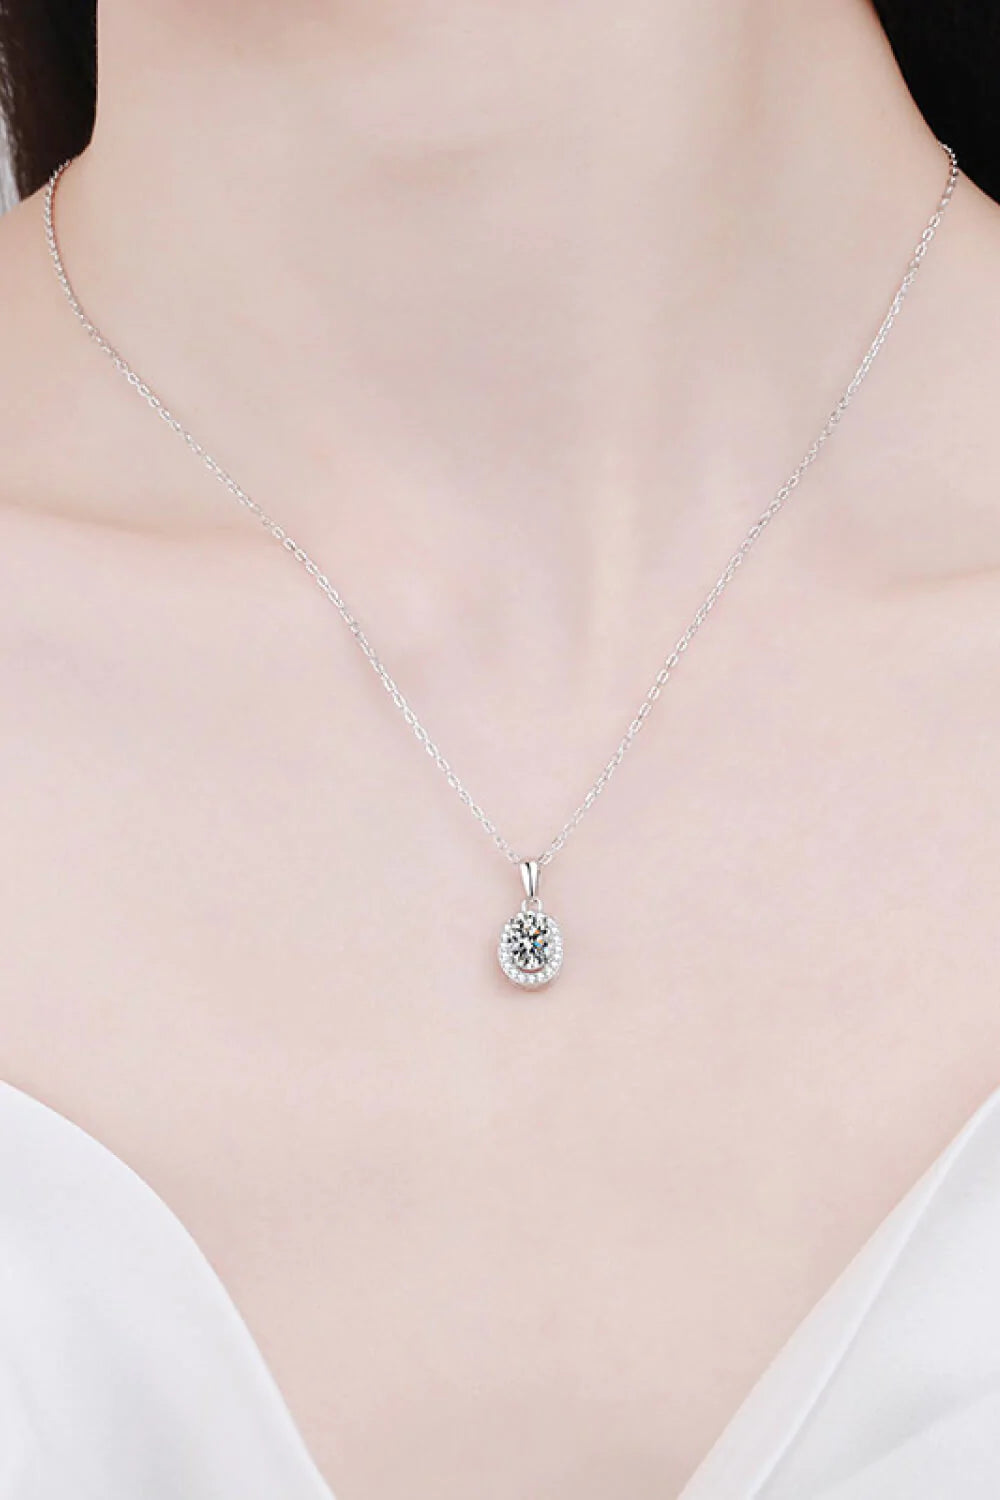 Be The One 1 Carat Moissanite Pendant Necklace - Necklaces - FITGGINS